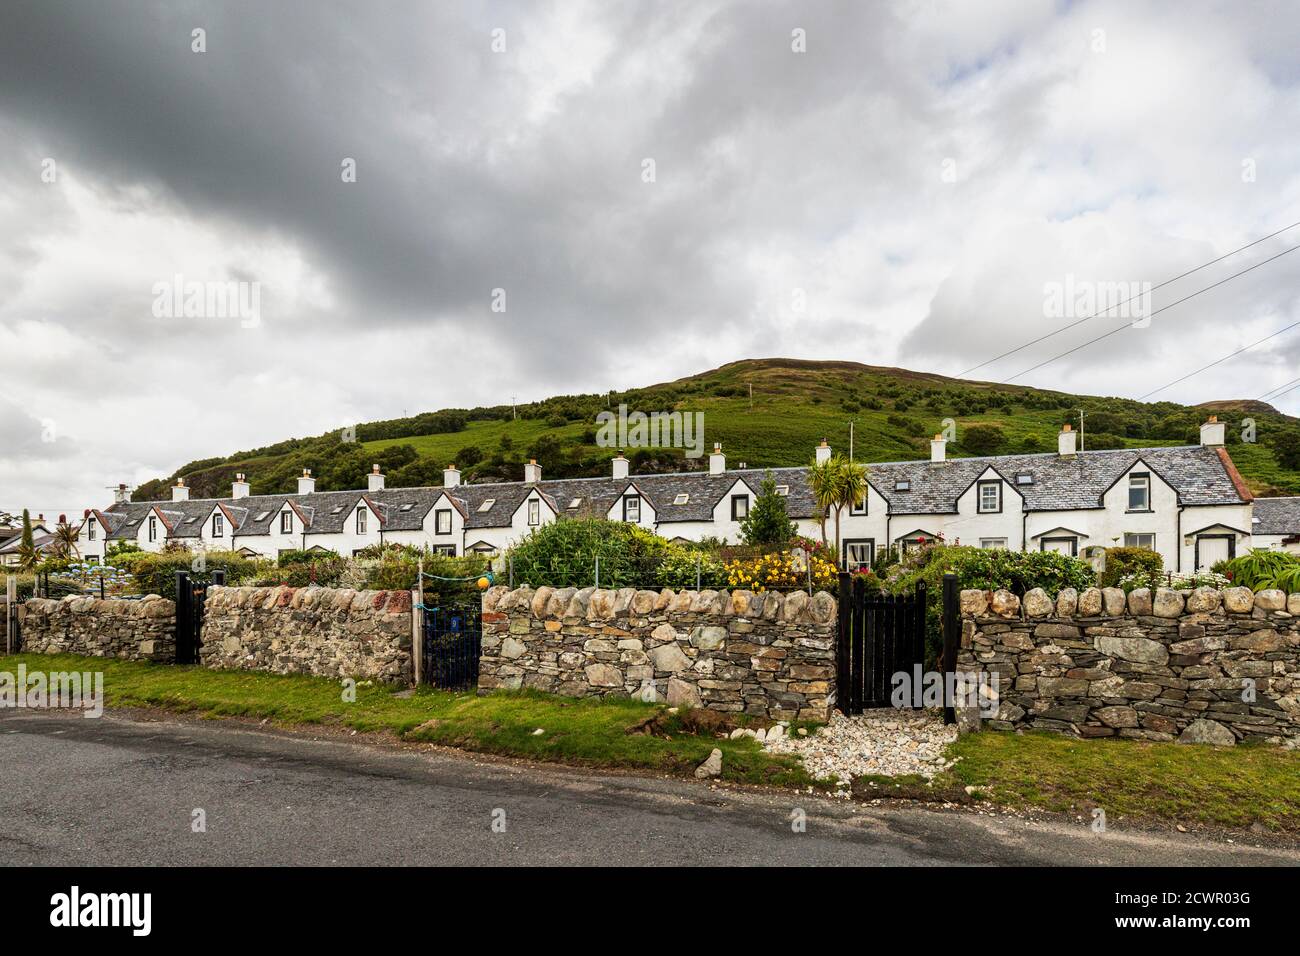 The Twelve Apostles, a row of fishermen's cottages, in Catacol, Isle of Arran, North Ayrshire, Scotland, UK Stock Photo